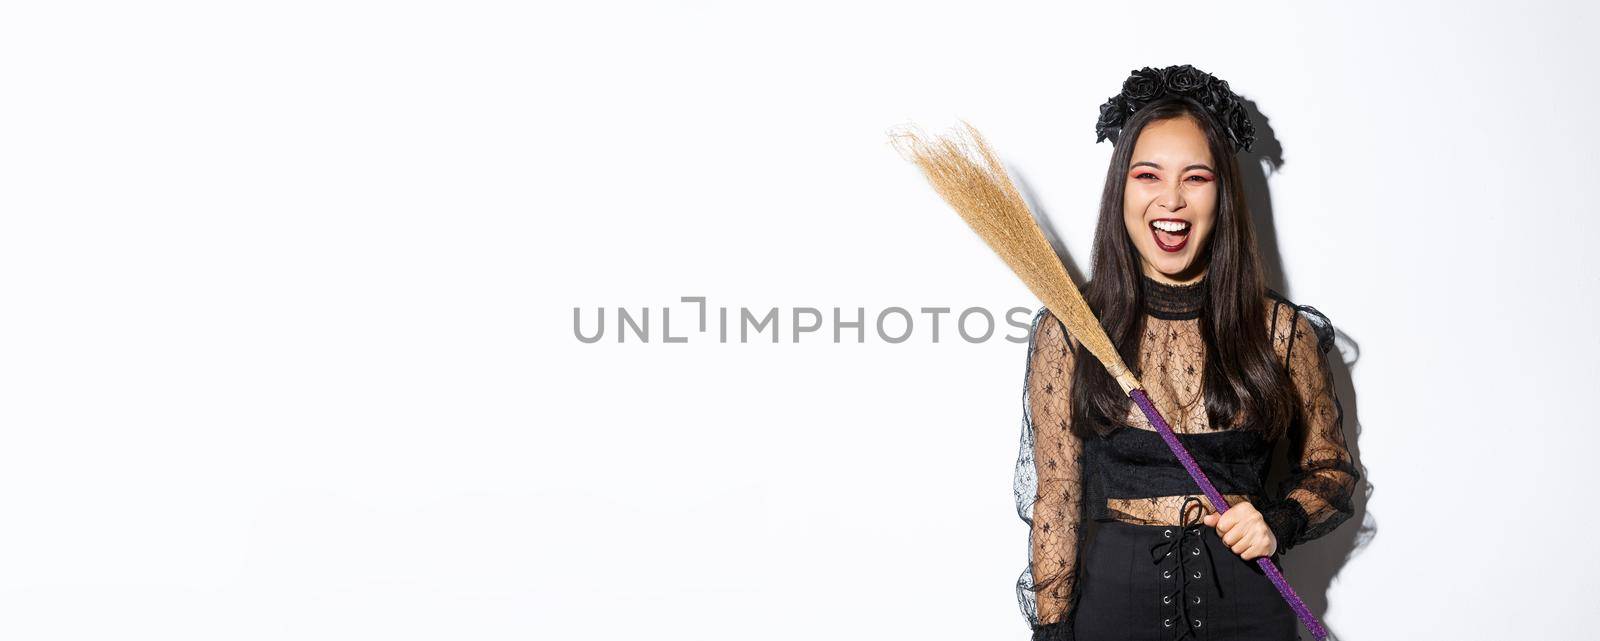 Sassy evil witch laughing and waving her broom, wearing halloween costume, standing over white background.